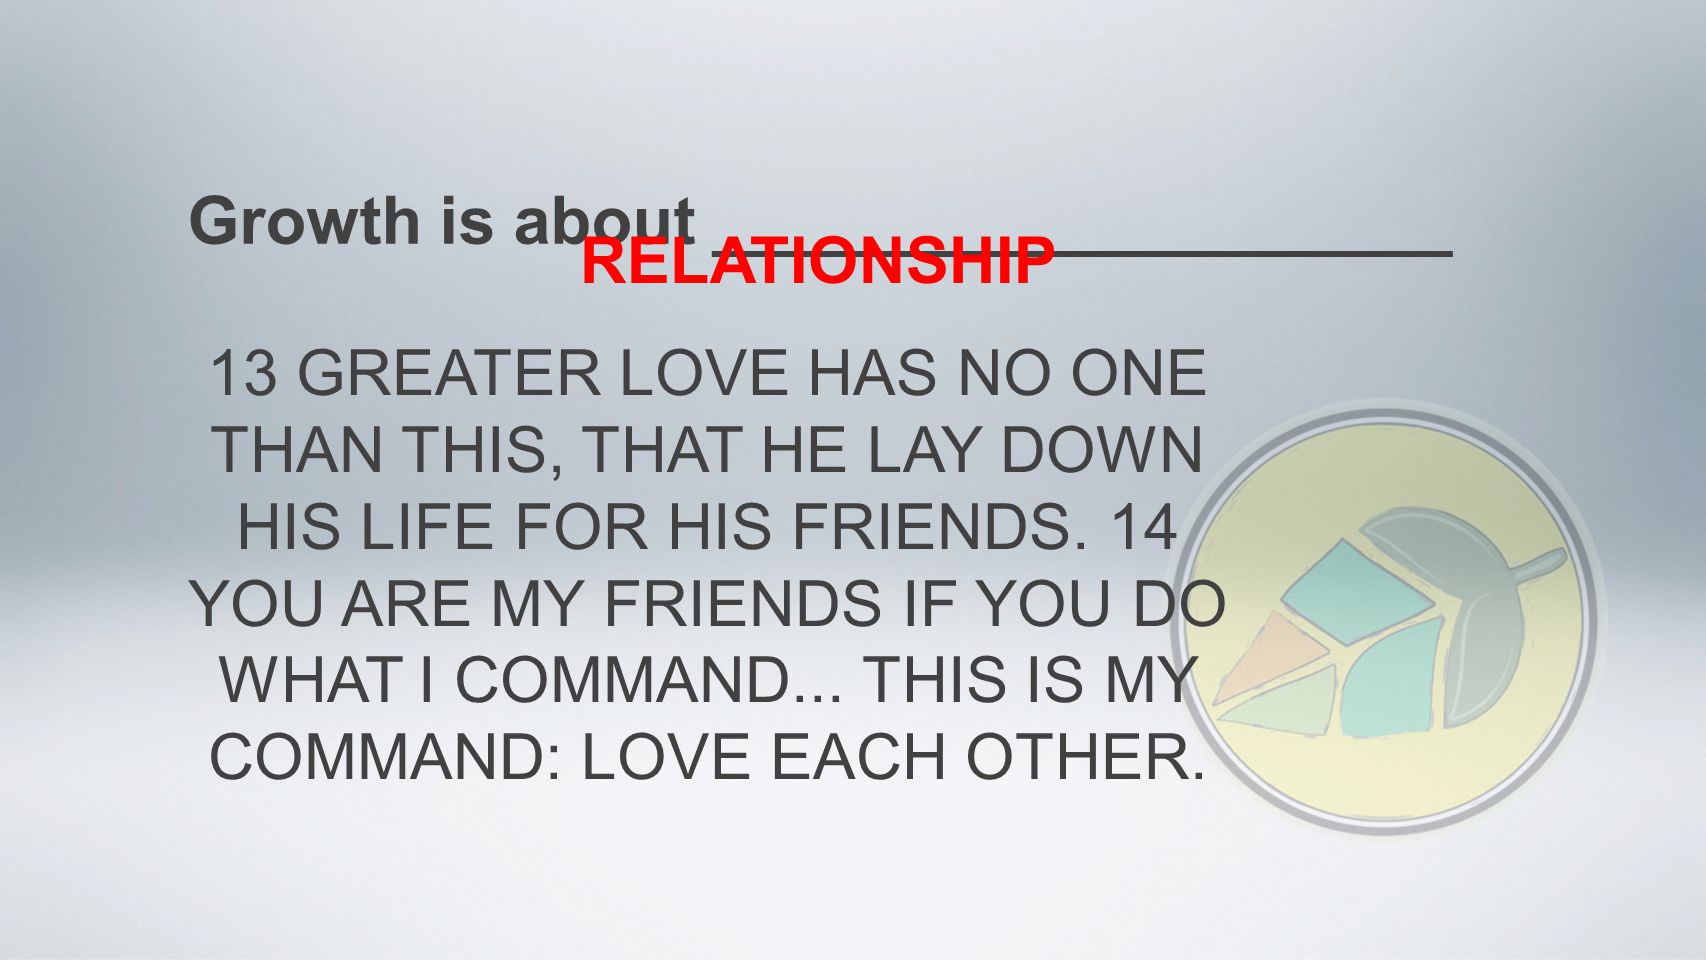 Growth is about ____________________ RELATIONSHIP 13 GREATER LOVE HAS NO ONE THAN THIS, THAT HE LAY DOWN HIS LIFE FOR HIS FRIENDS.